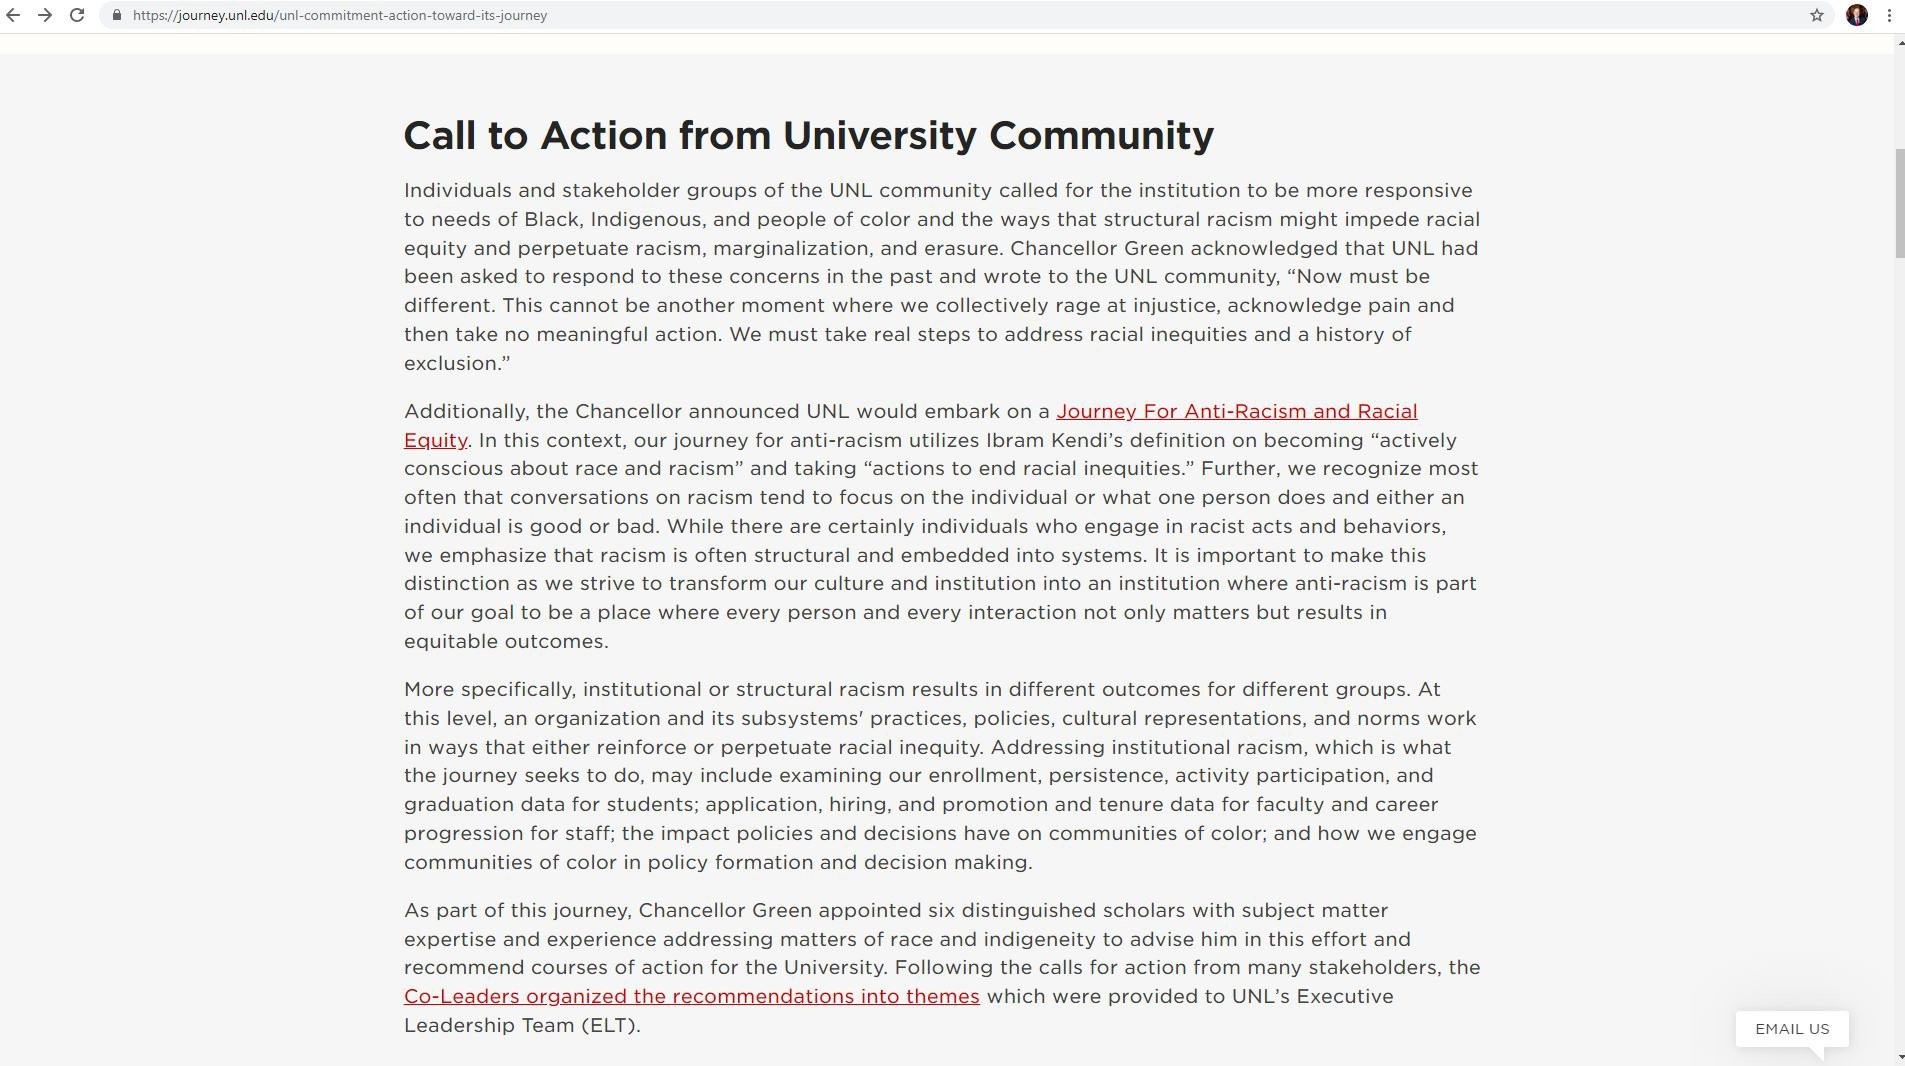 UNL "Call to Action" referencing Ibram X. Kendi. (Taylor Gage / Twitter).